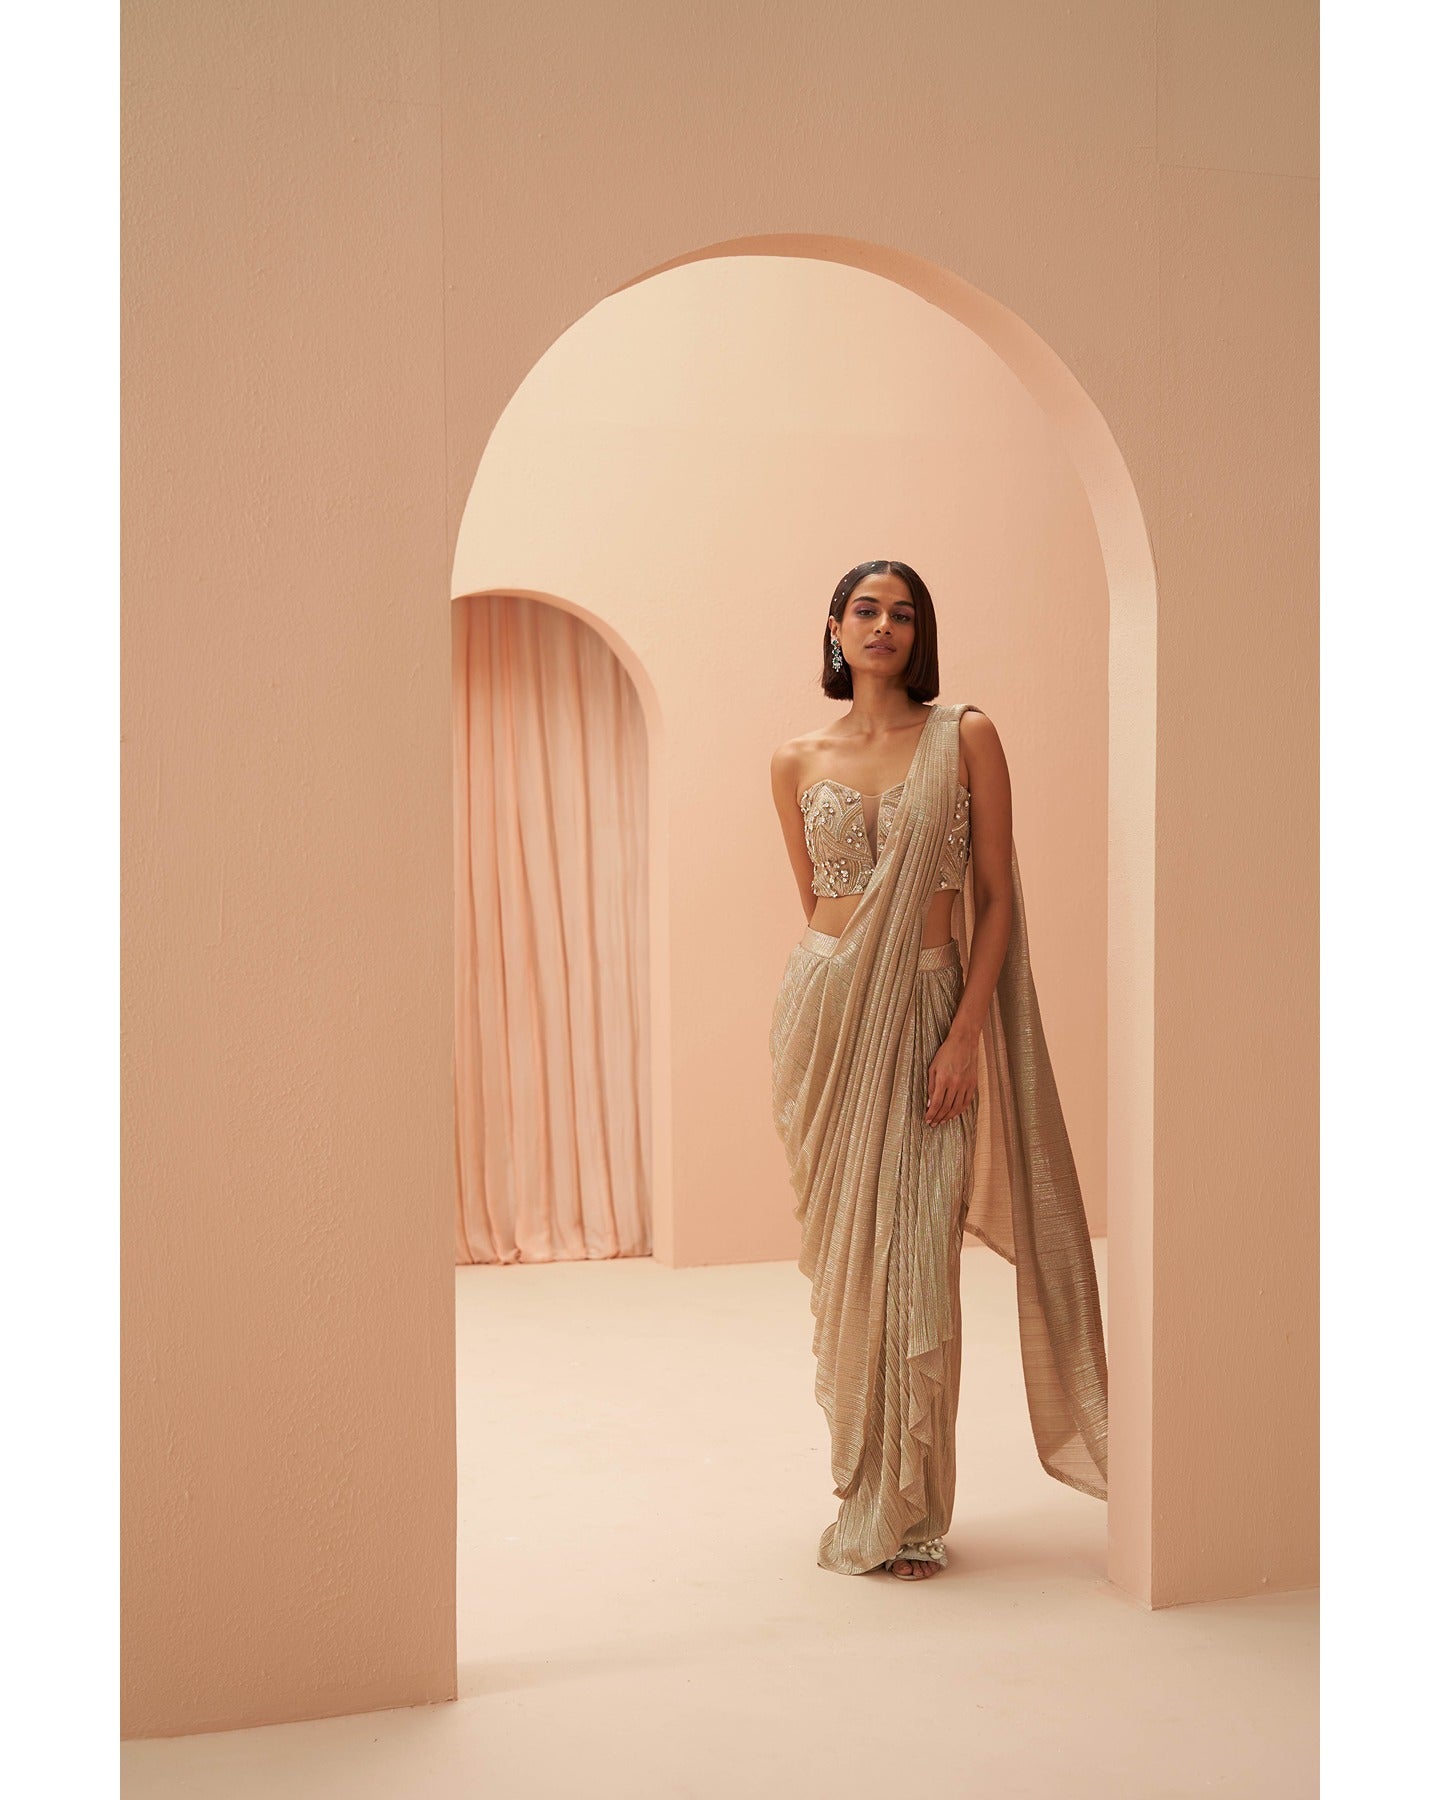 Gilded Grace: Hand-embroidered enchantment graces this golden drape saree, a radiant masterpiece of timeless elegance.